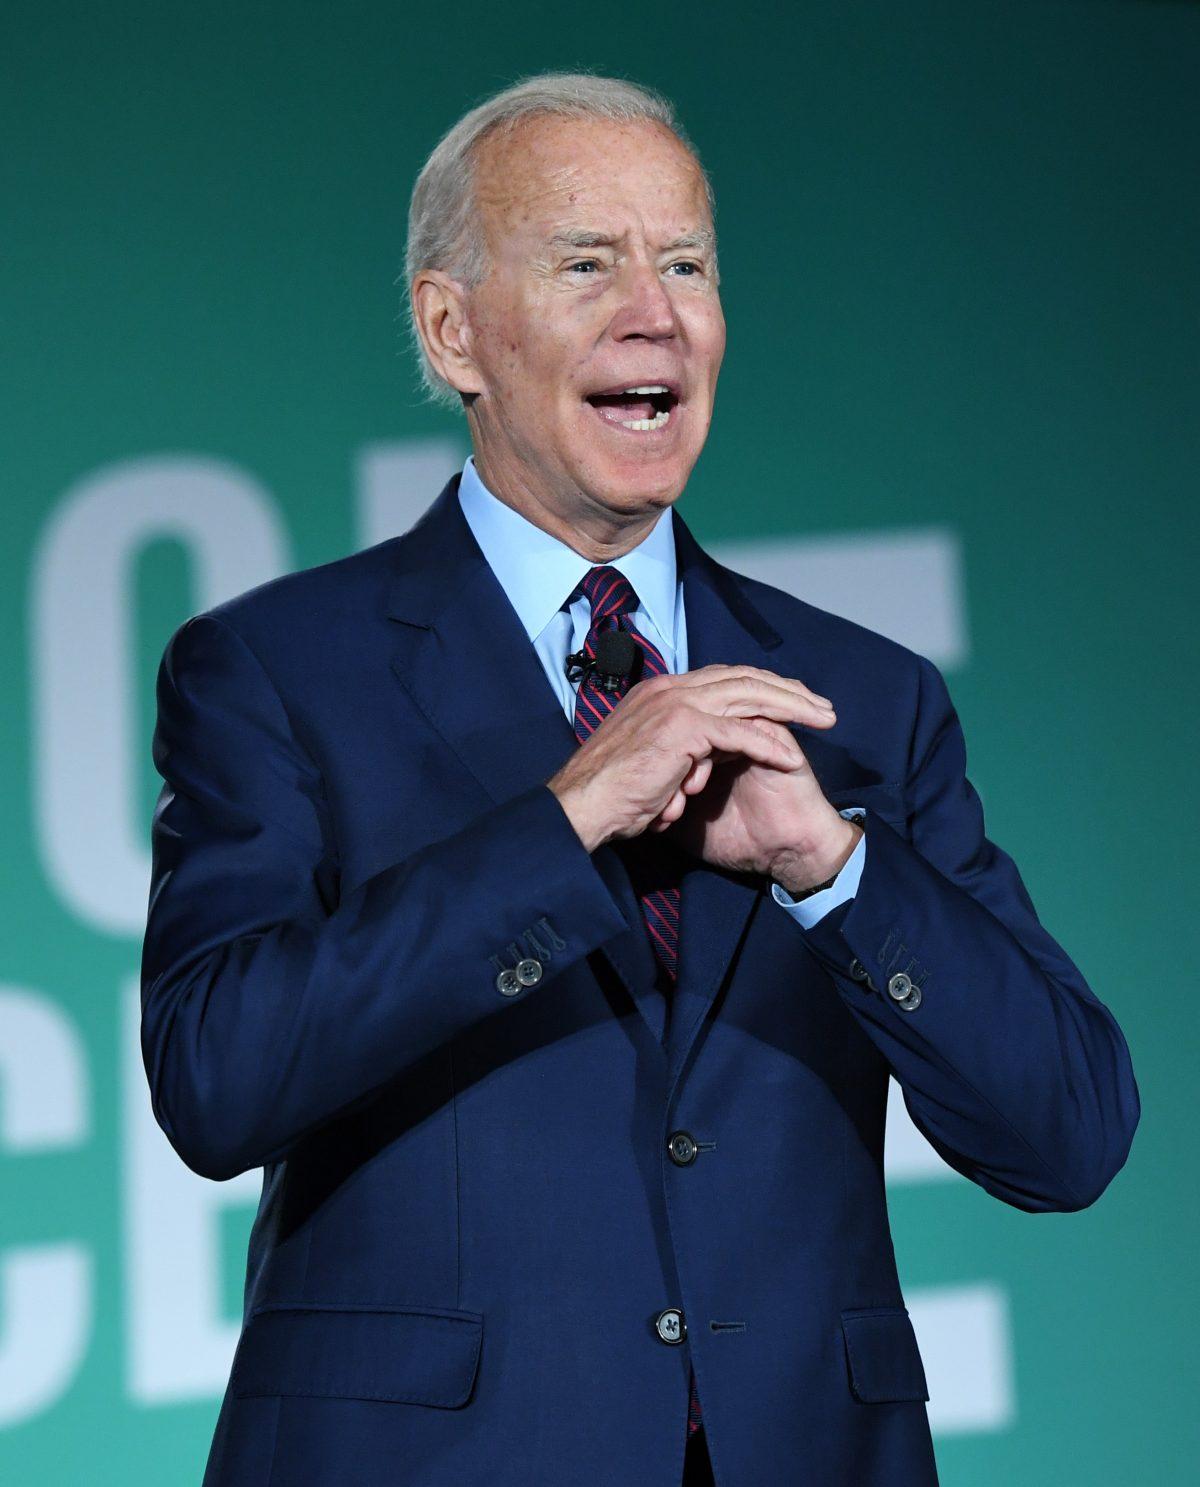 Democratic presidential candidate and former Vice President Joe Biden speaks during the 2020 Public Service Forum in Las Vegas on Aug. 3, 2019. (Ethan Miller/Getty Images)